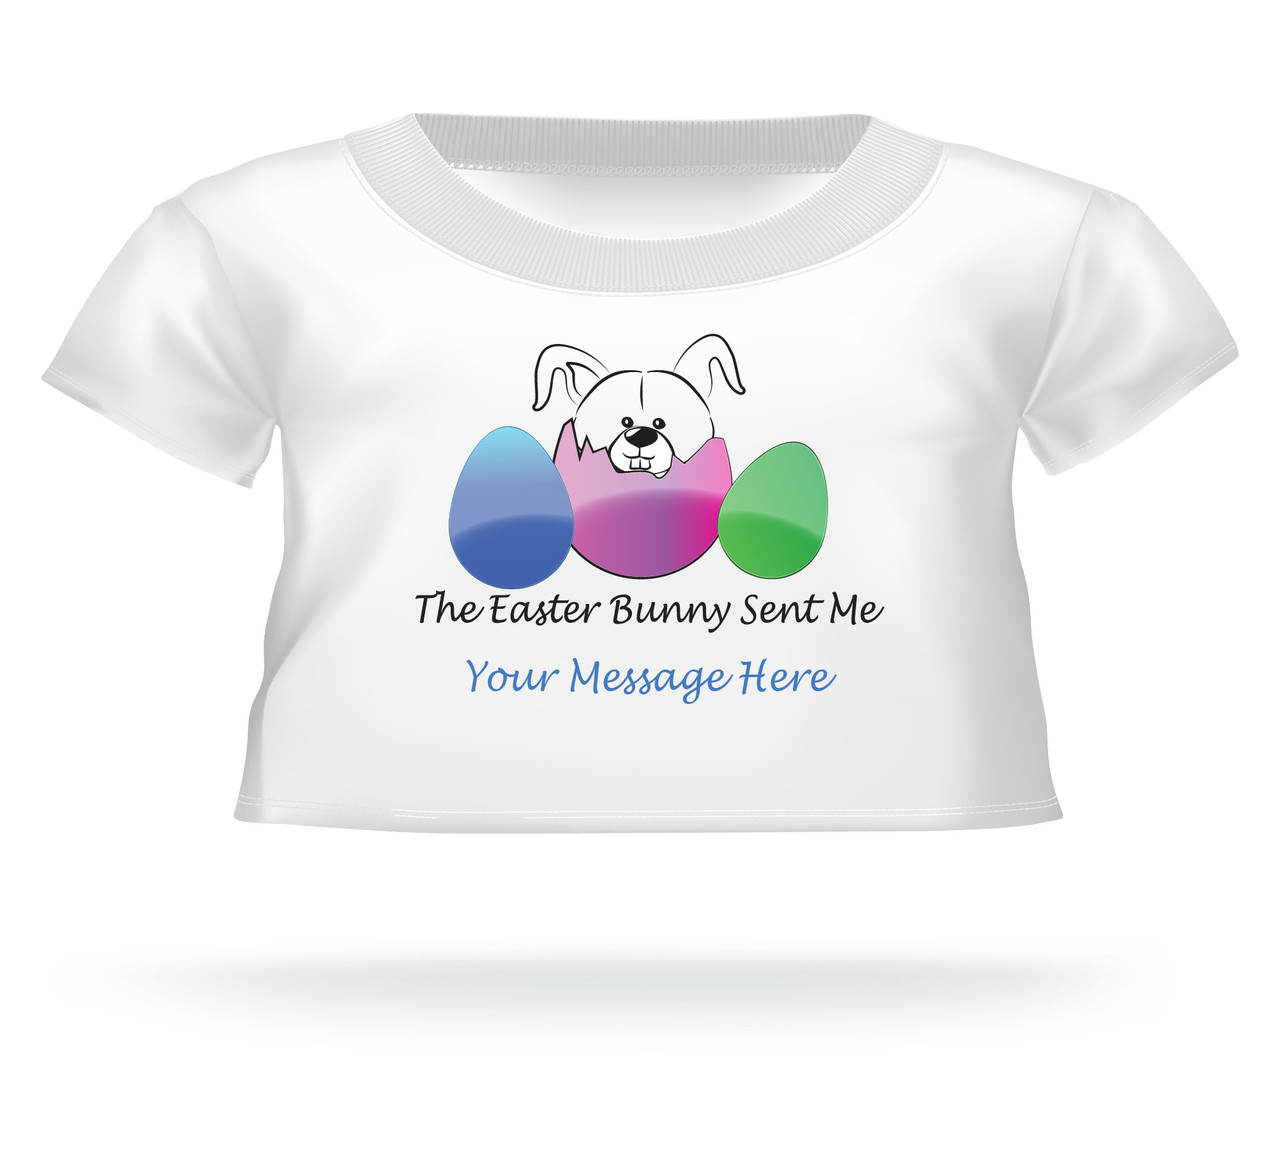 “The Easter Bunny Sent Me” Giant Teddy Bear Personalized Easter shirt